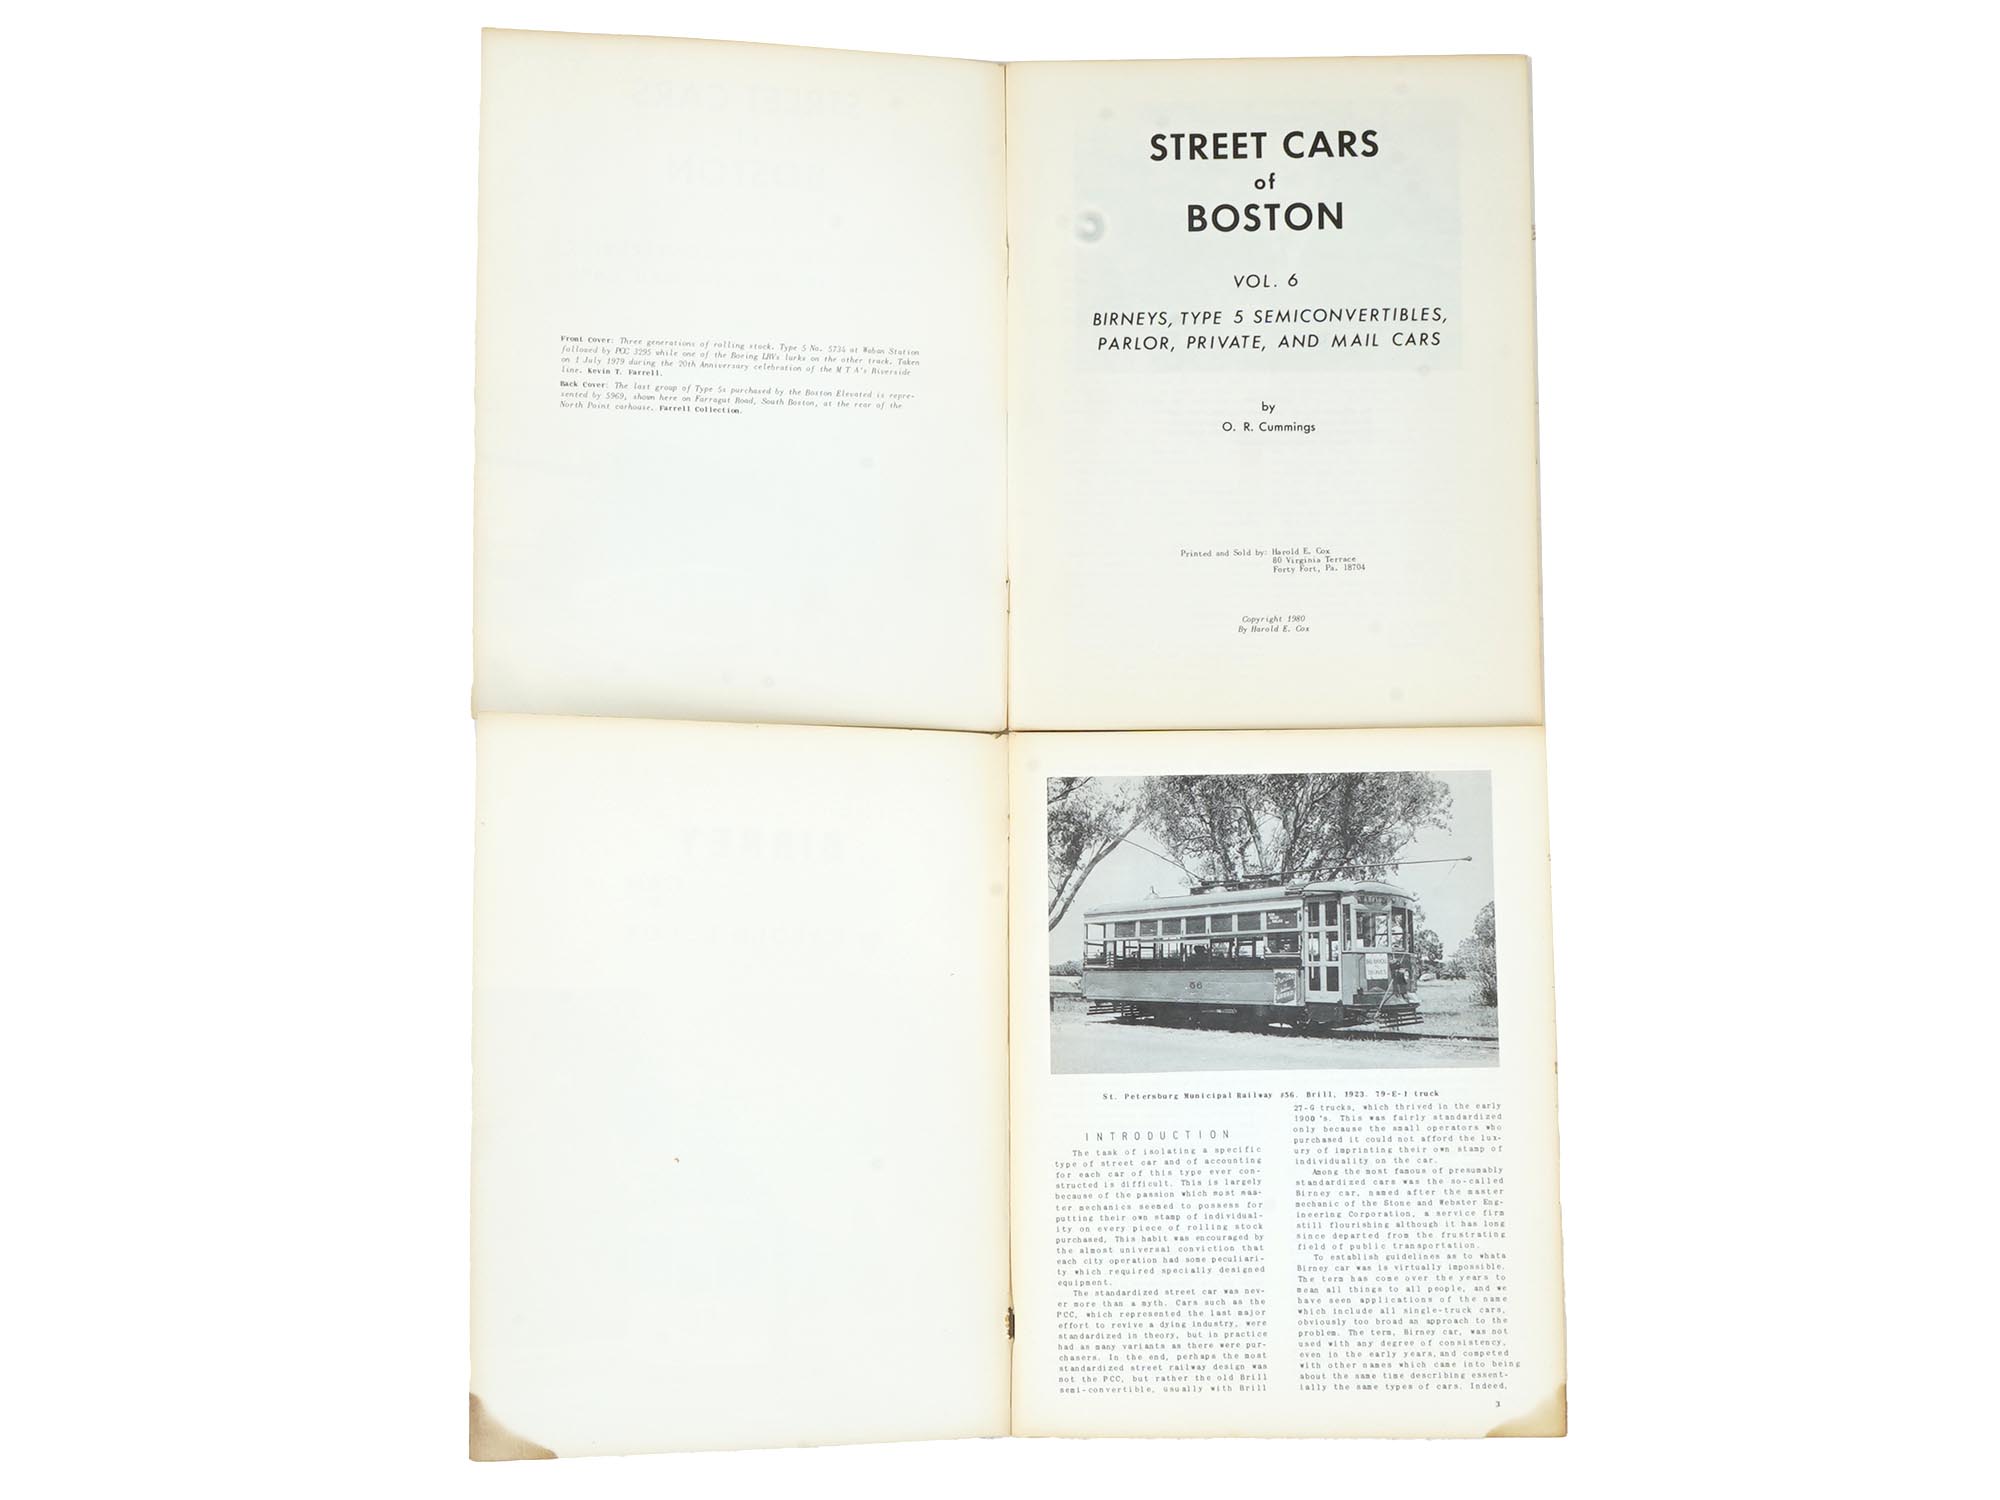 VINTAGE BOOKS ABOUT AMERICAN STREET RAILWAYS PIC-1